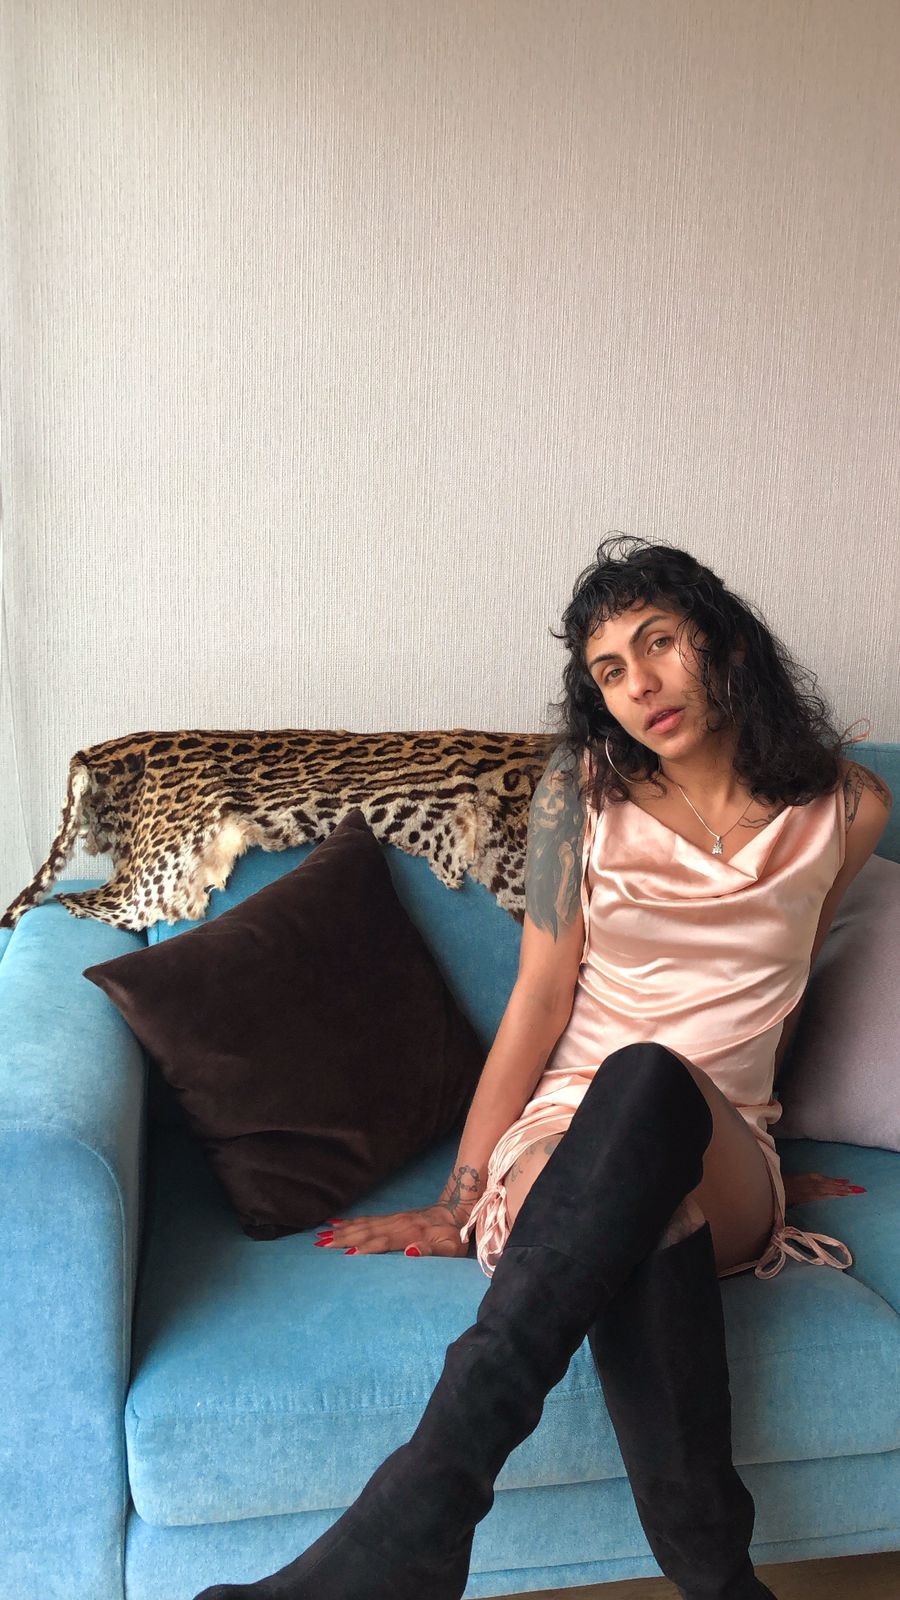 Gretel Warmicha is sitting on a blue couch with a leopard print throw behind them, wearing black boots and a peach slip dress